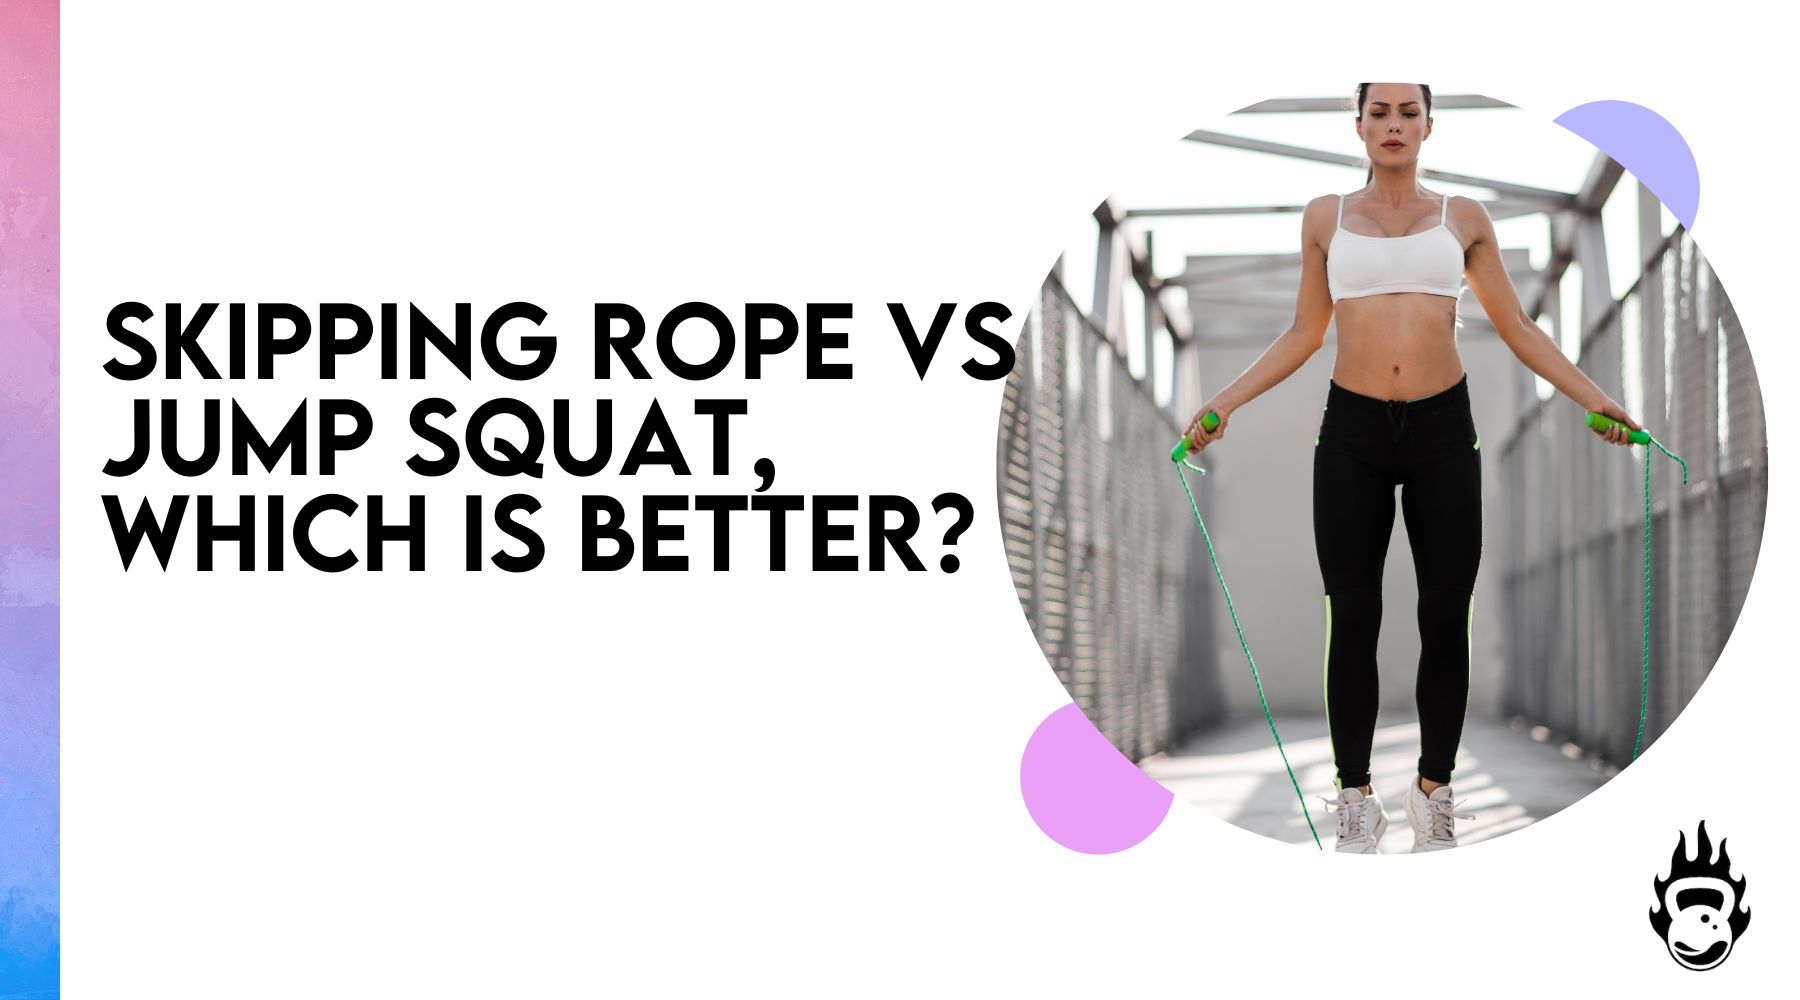 Skipping rope vs Jump squat, which is better